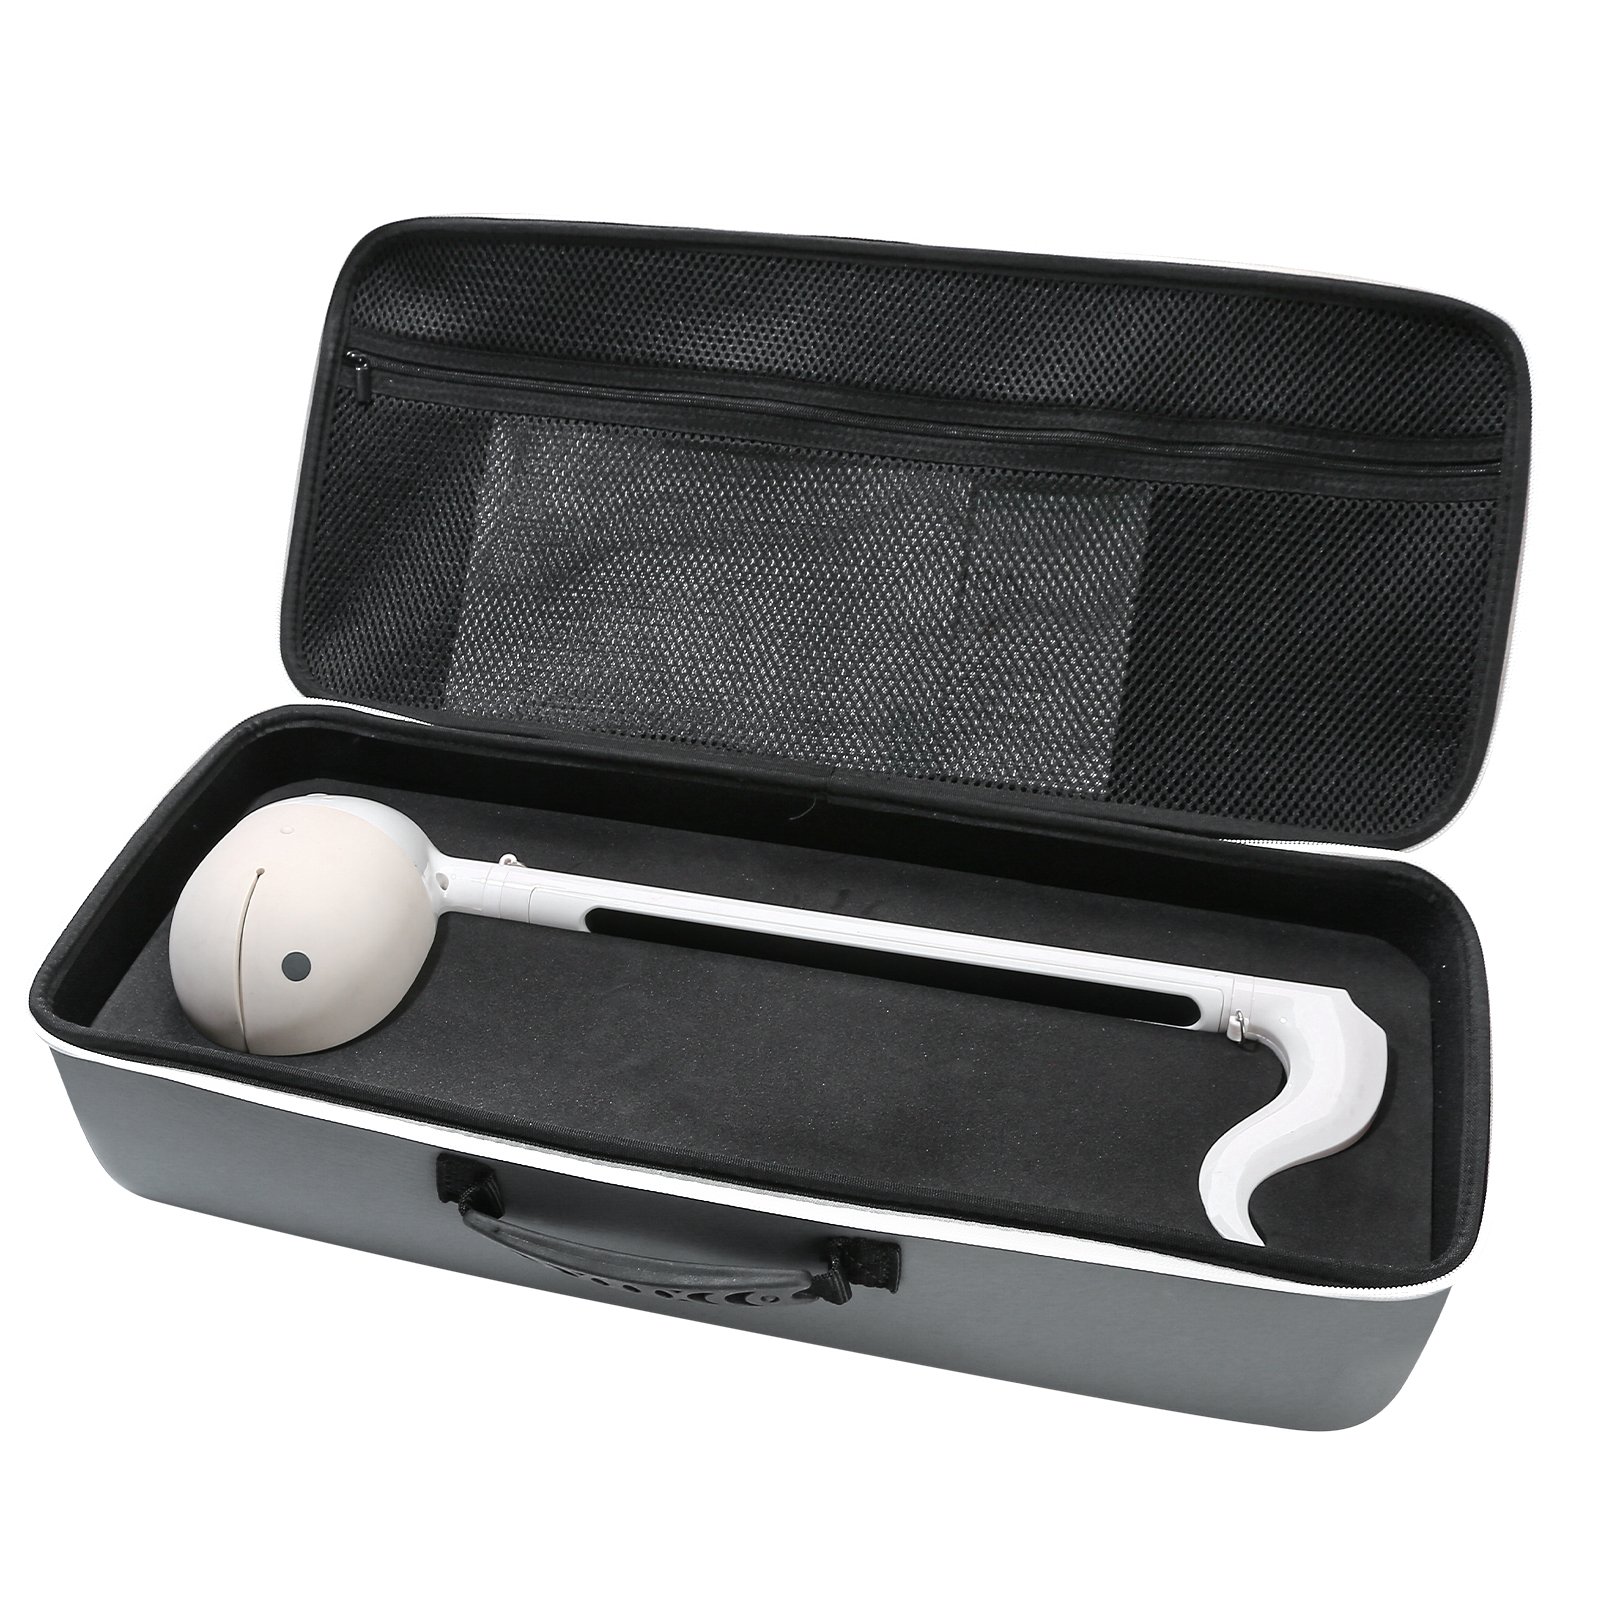 Protection Case for Otamatone Deluxe and Techno - Grey